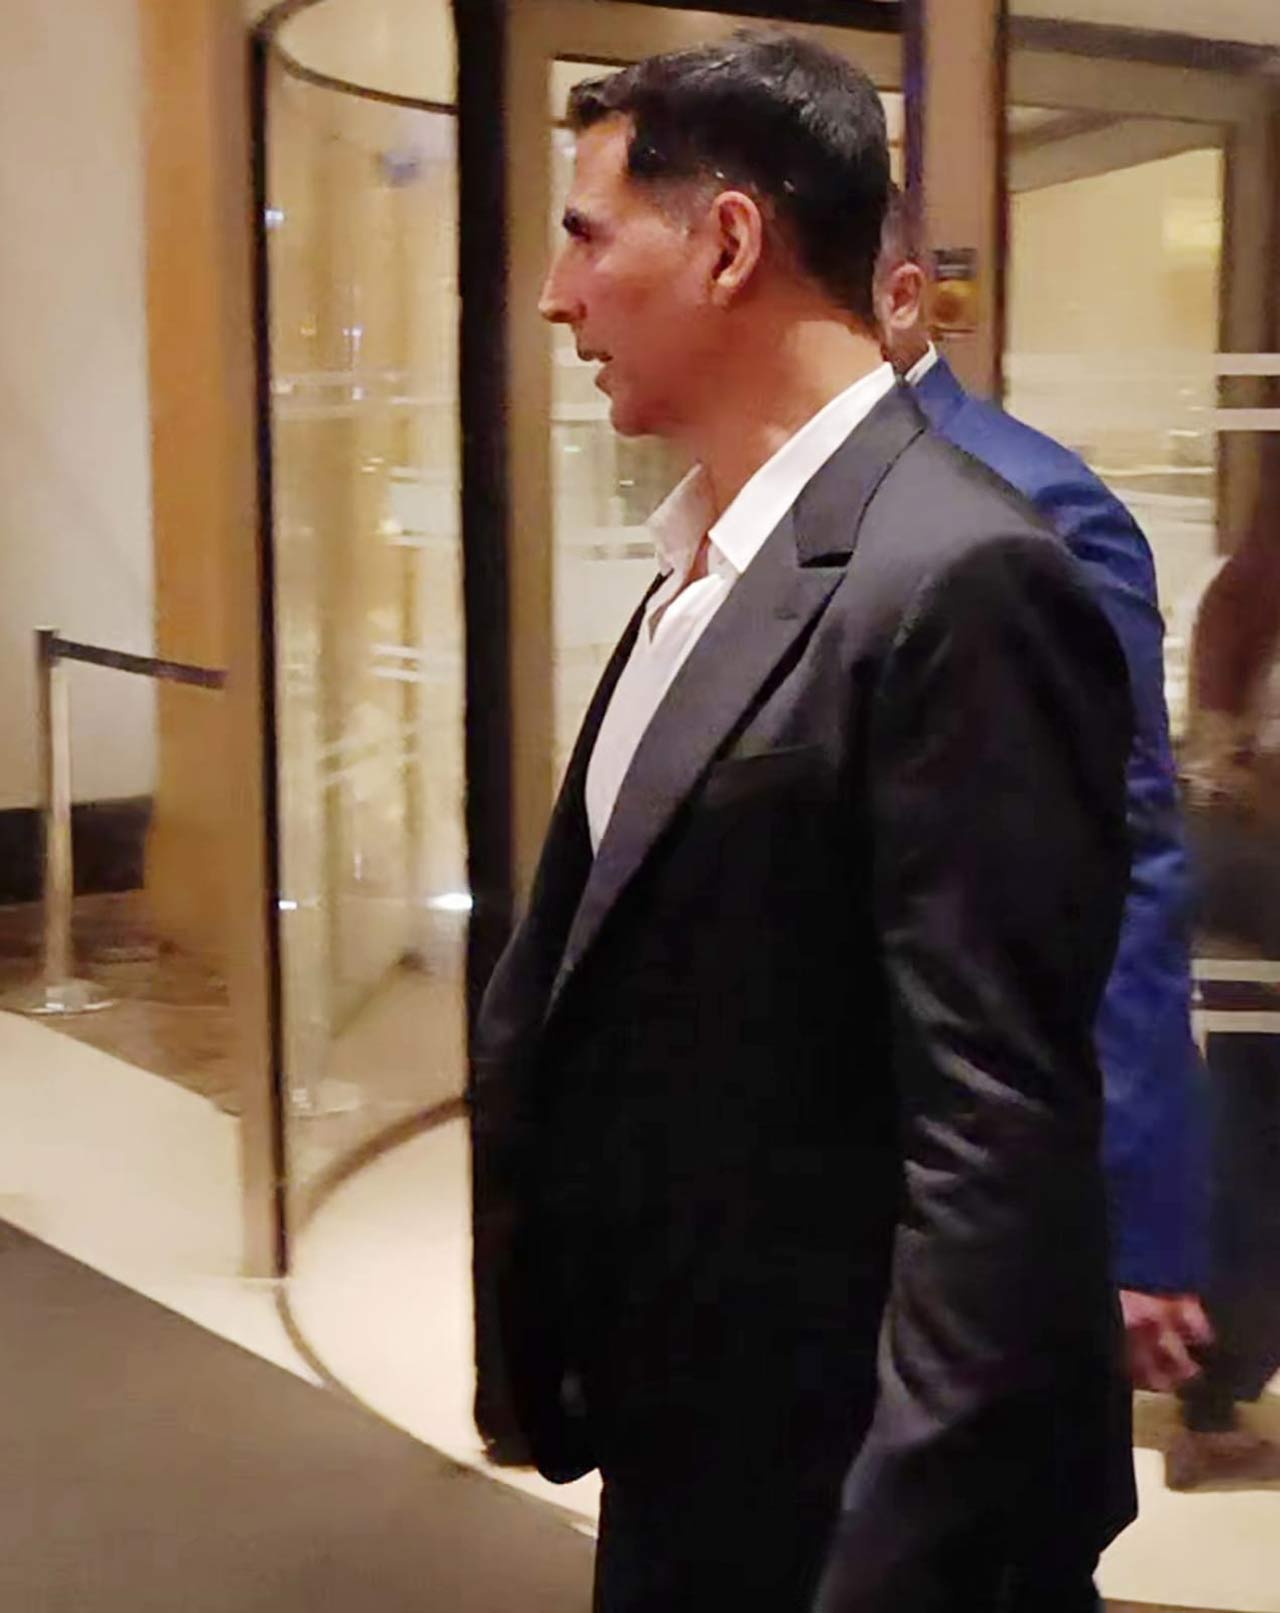 Akshay Kumar was snapped all suited up for a private party hosted in the city. The actor, who is often clicked working hard on his projects, took some time off to celebrate privately in Juhu, Mumbai.
 